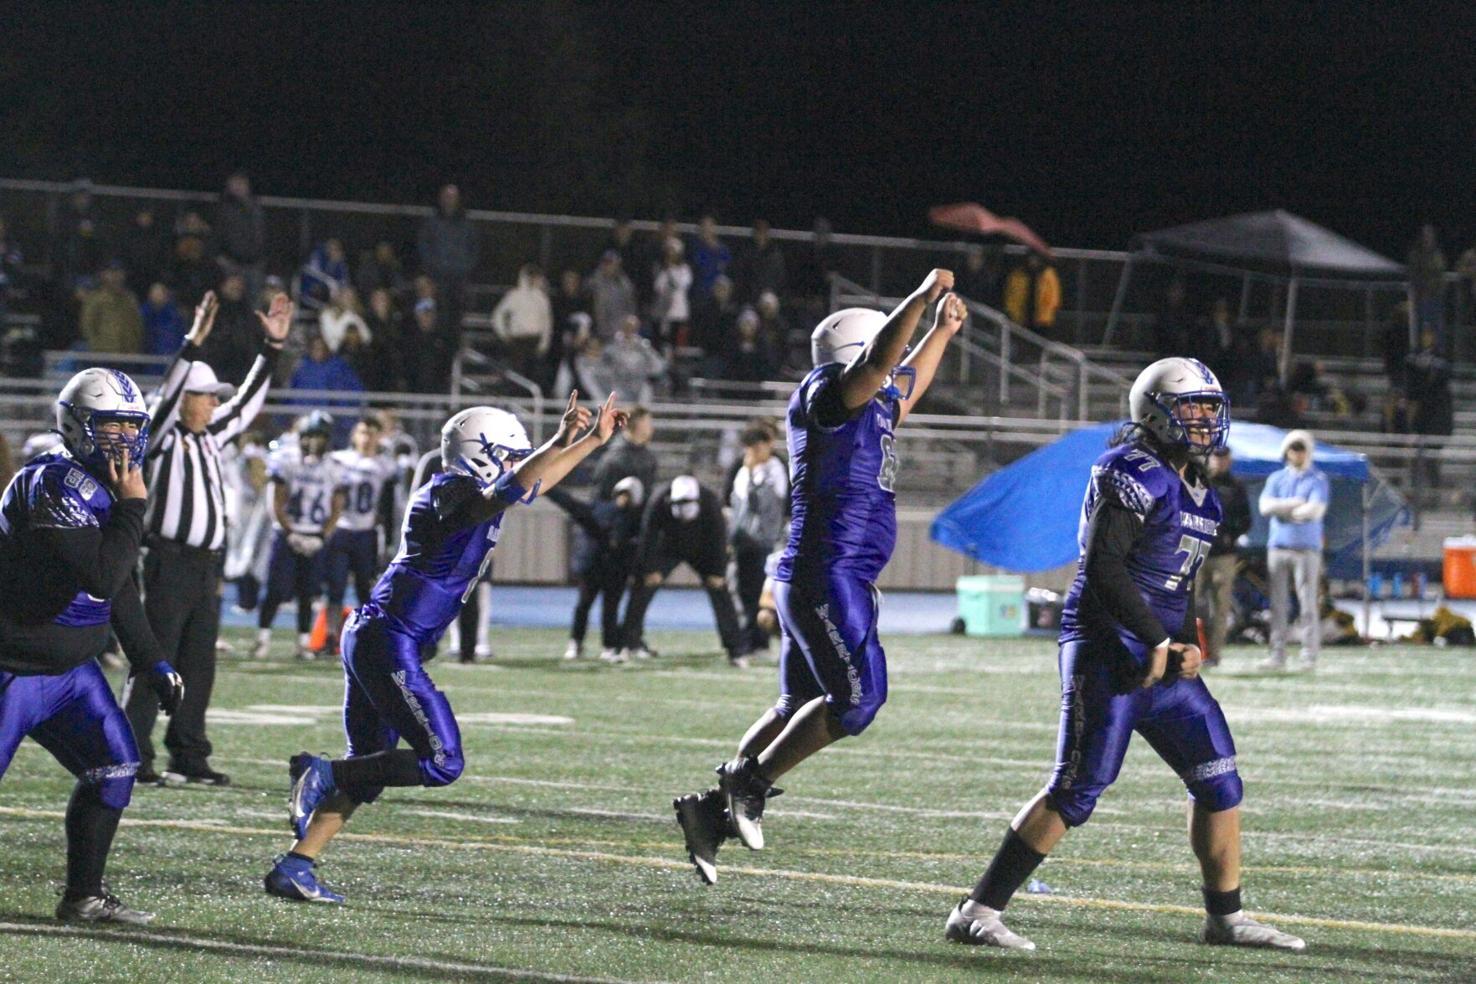 South City players celebrate their go-ahead touchdown with 10 seconds to play as the third-seeded Warriors topped No. 7 Leland, 11-9, in the CCS Division V semifinals. (Source: Nathan Mollat, San Mateo Daily Journal)